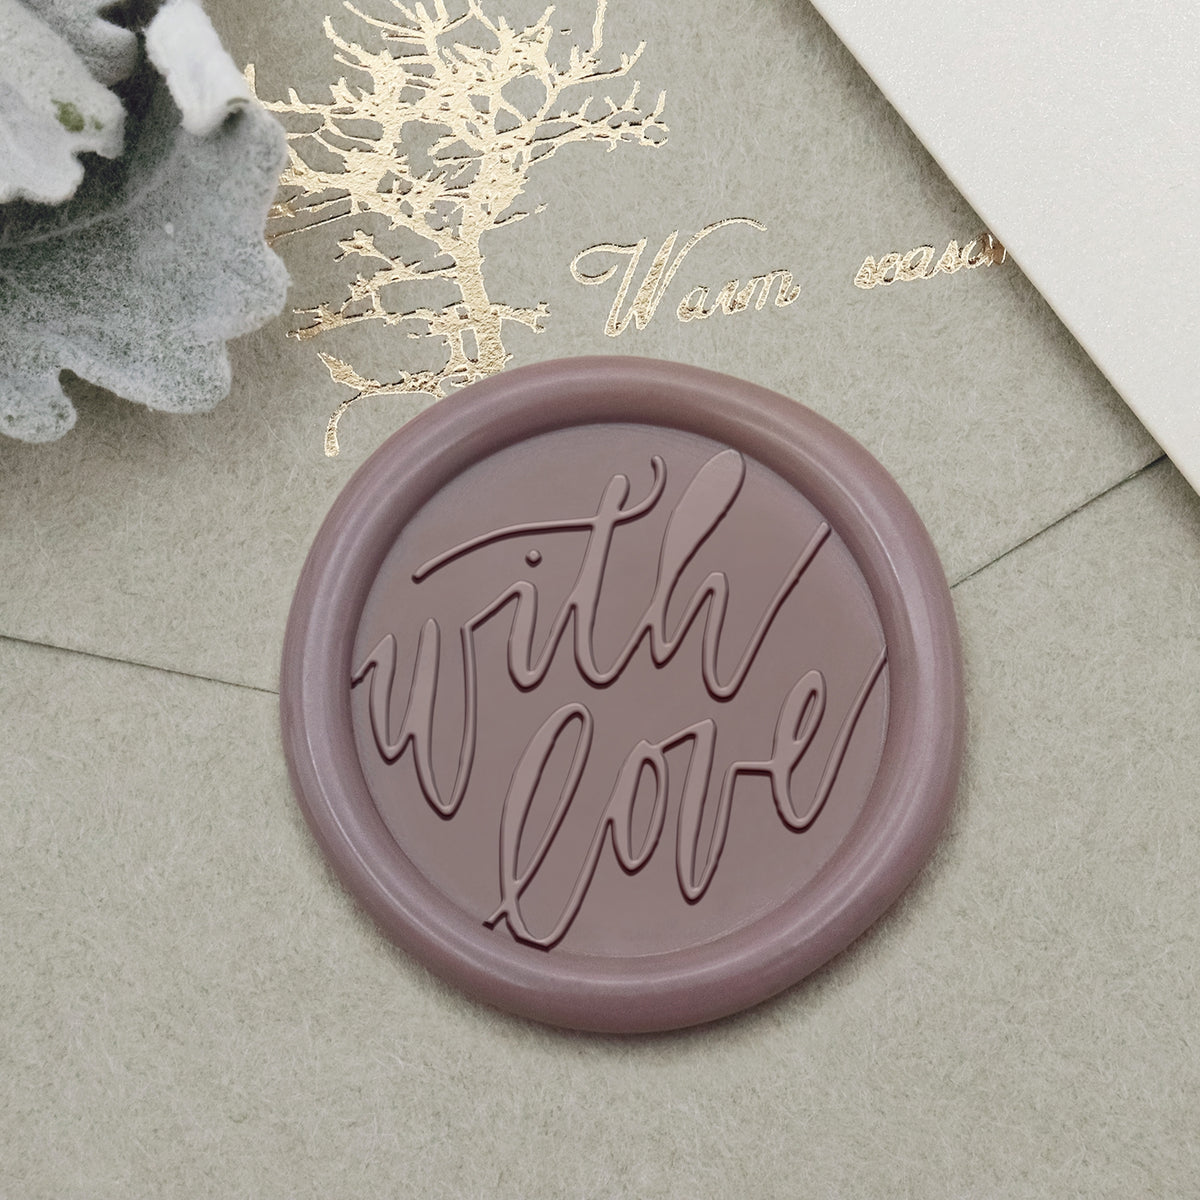 Stamprints Greeting Wax Seal Stamp - With Love 1